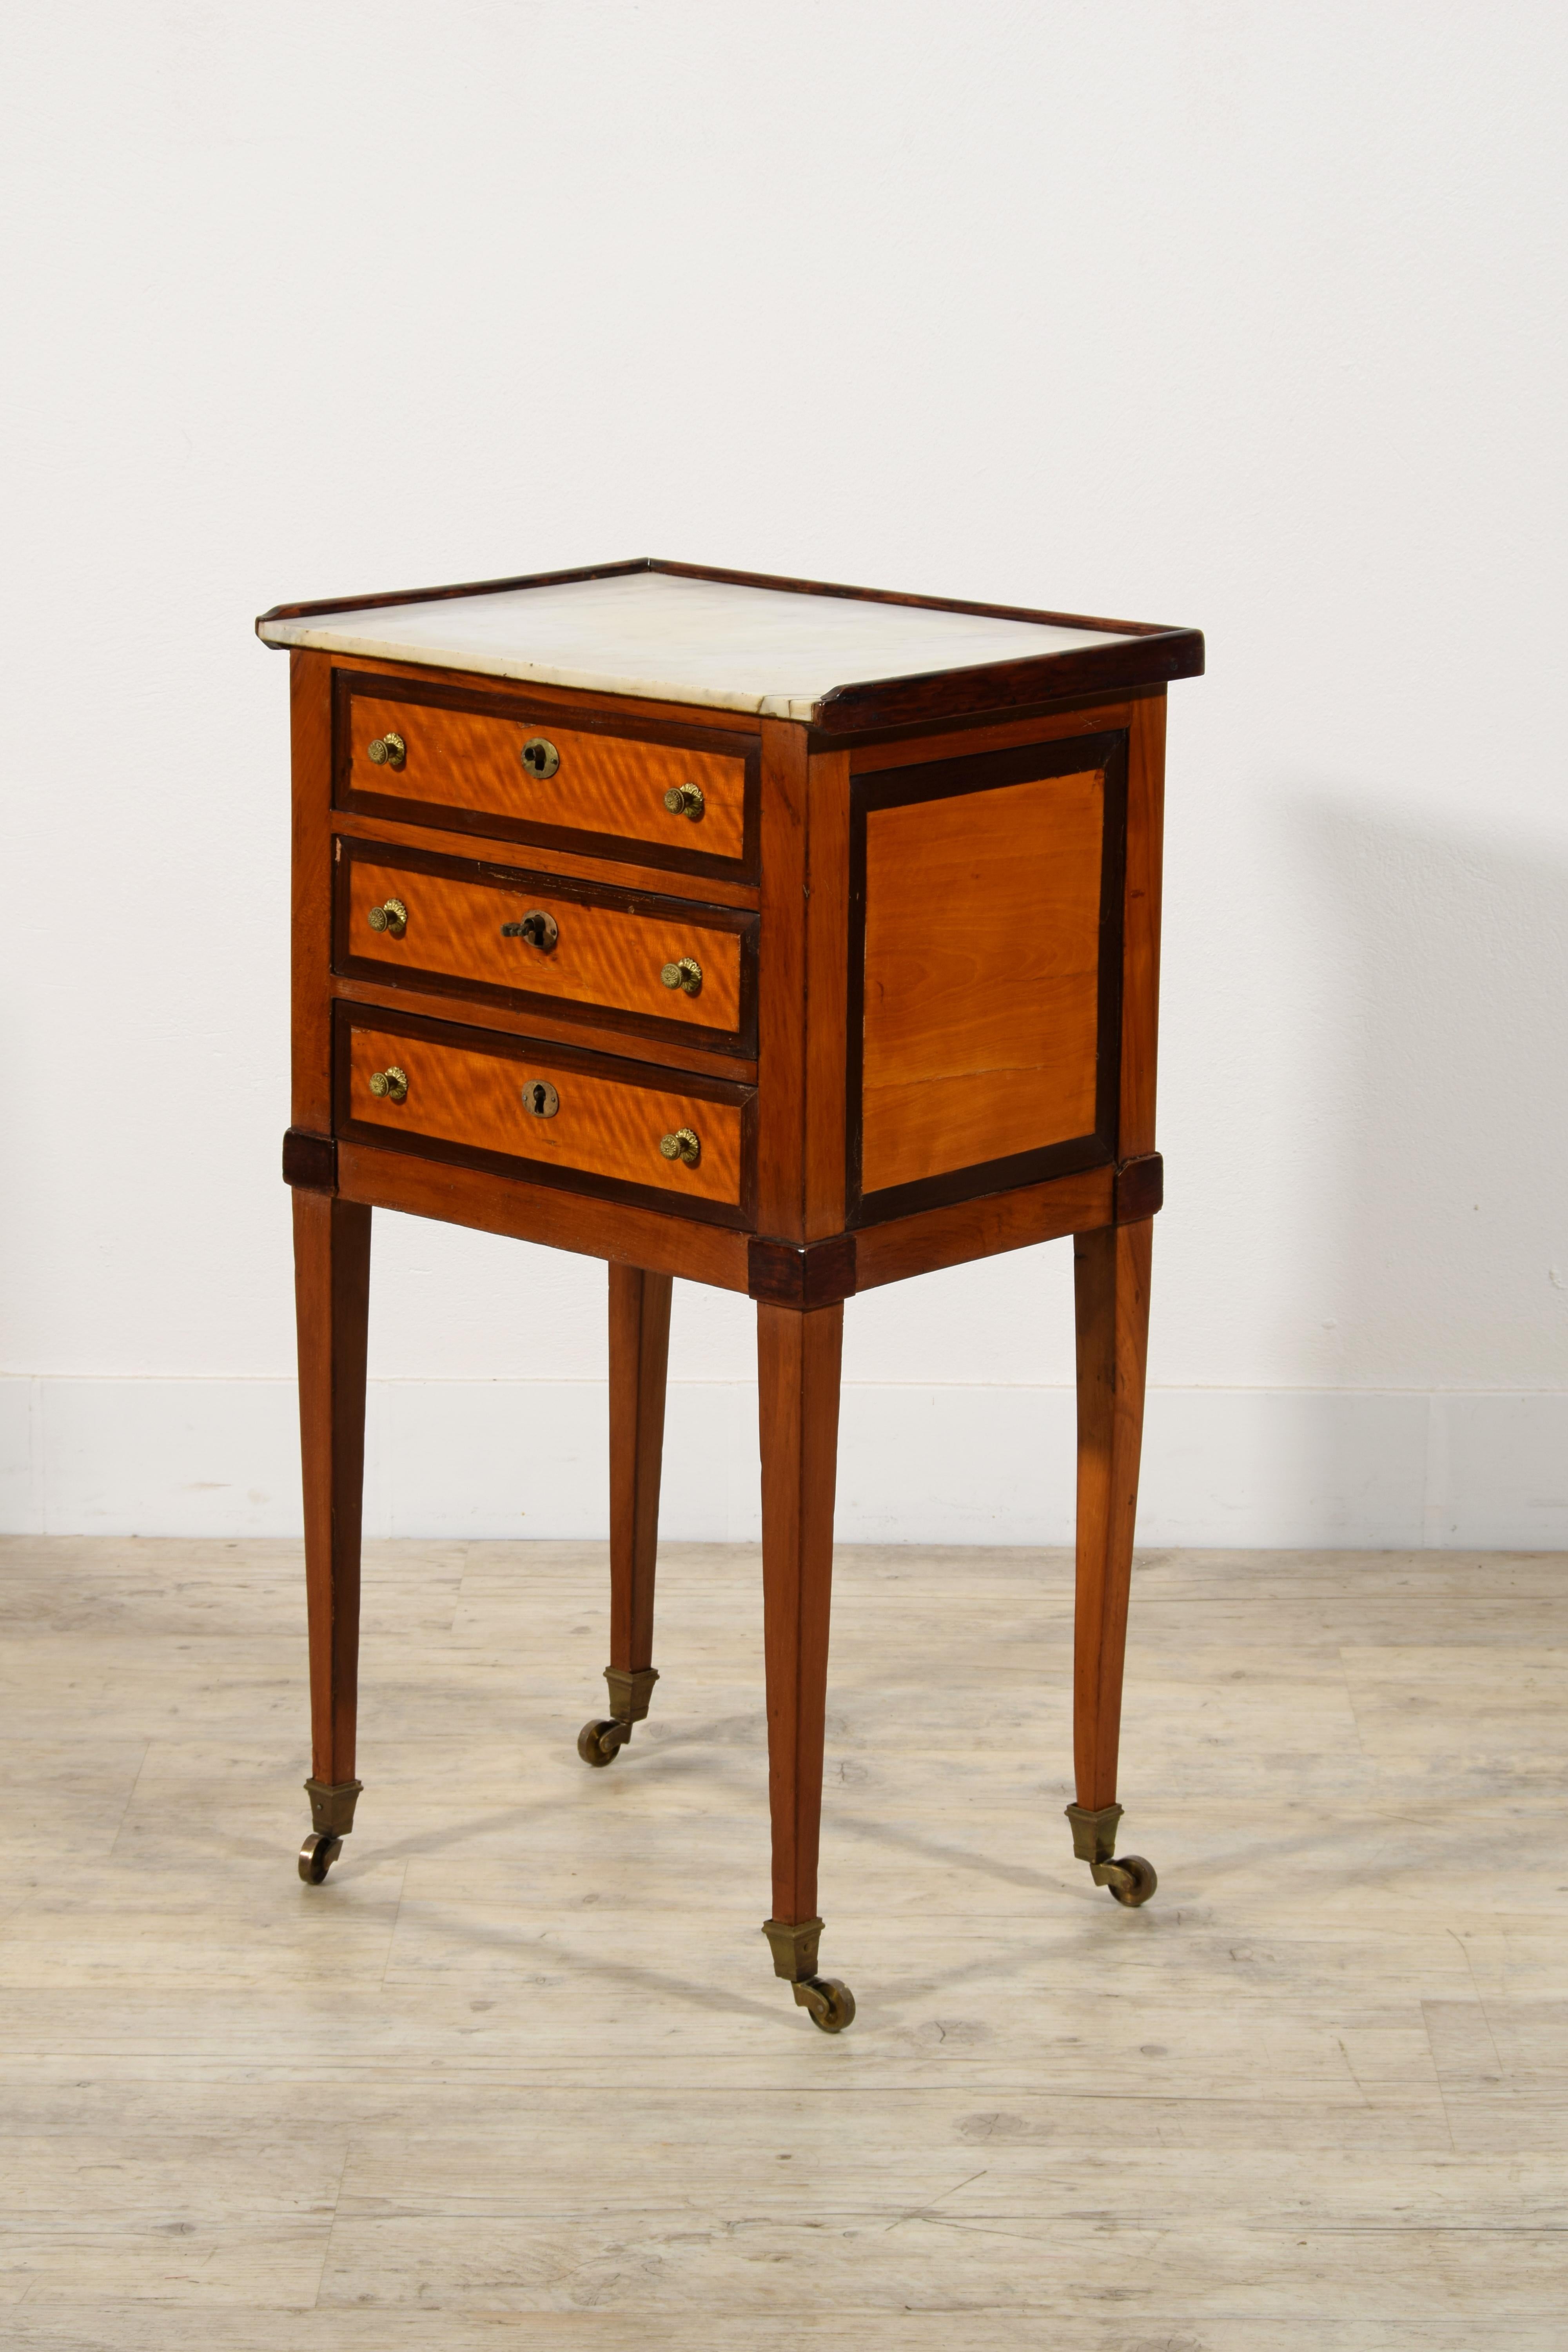 19th century, French center cabinet with marble top
This central cabinet was made in France, during the Directoire period, between the late eighteenth and the beginning of the nineteenth century. The wooden structure is veneered in cherry wood,